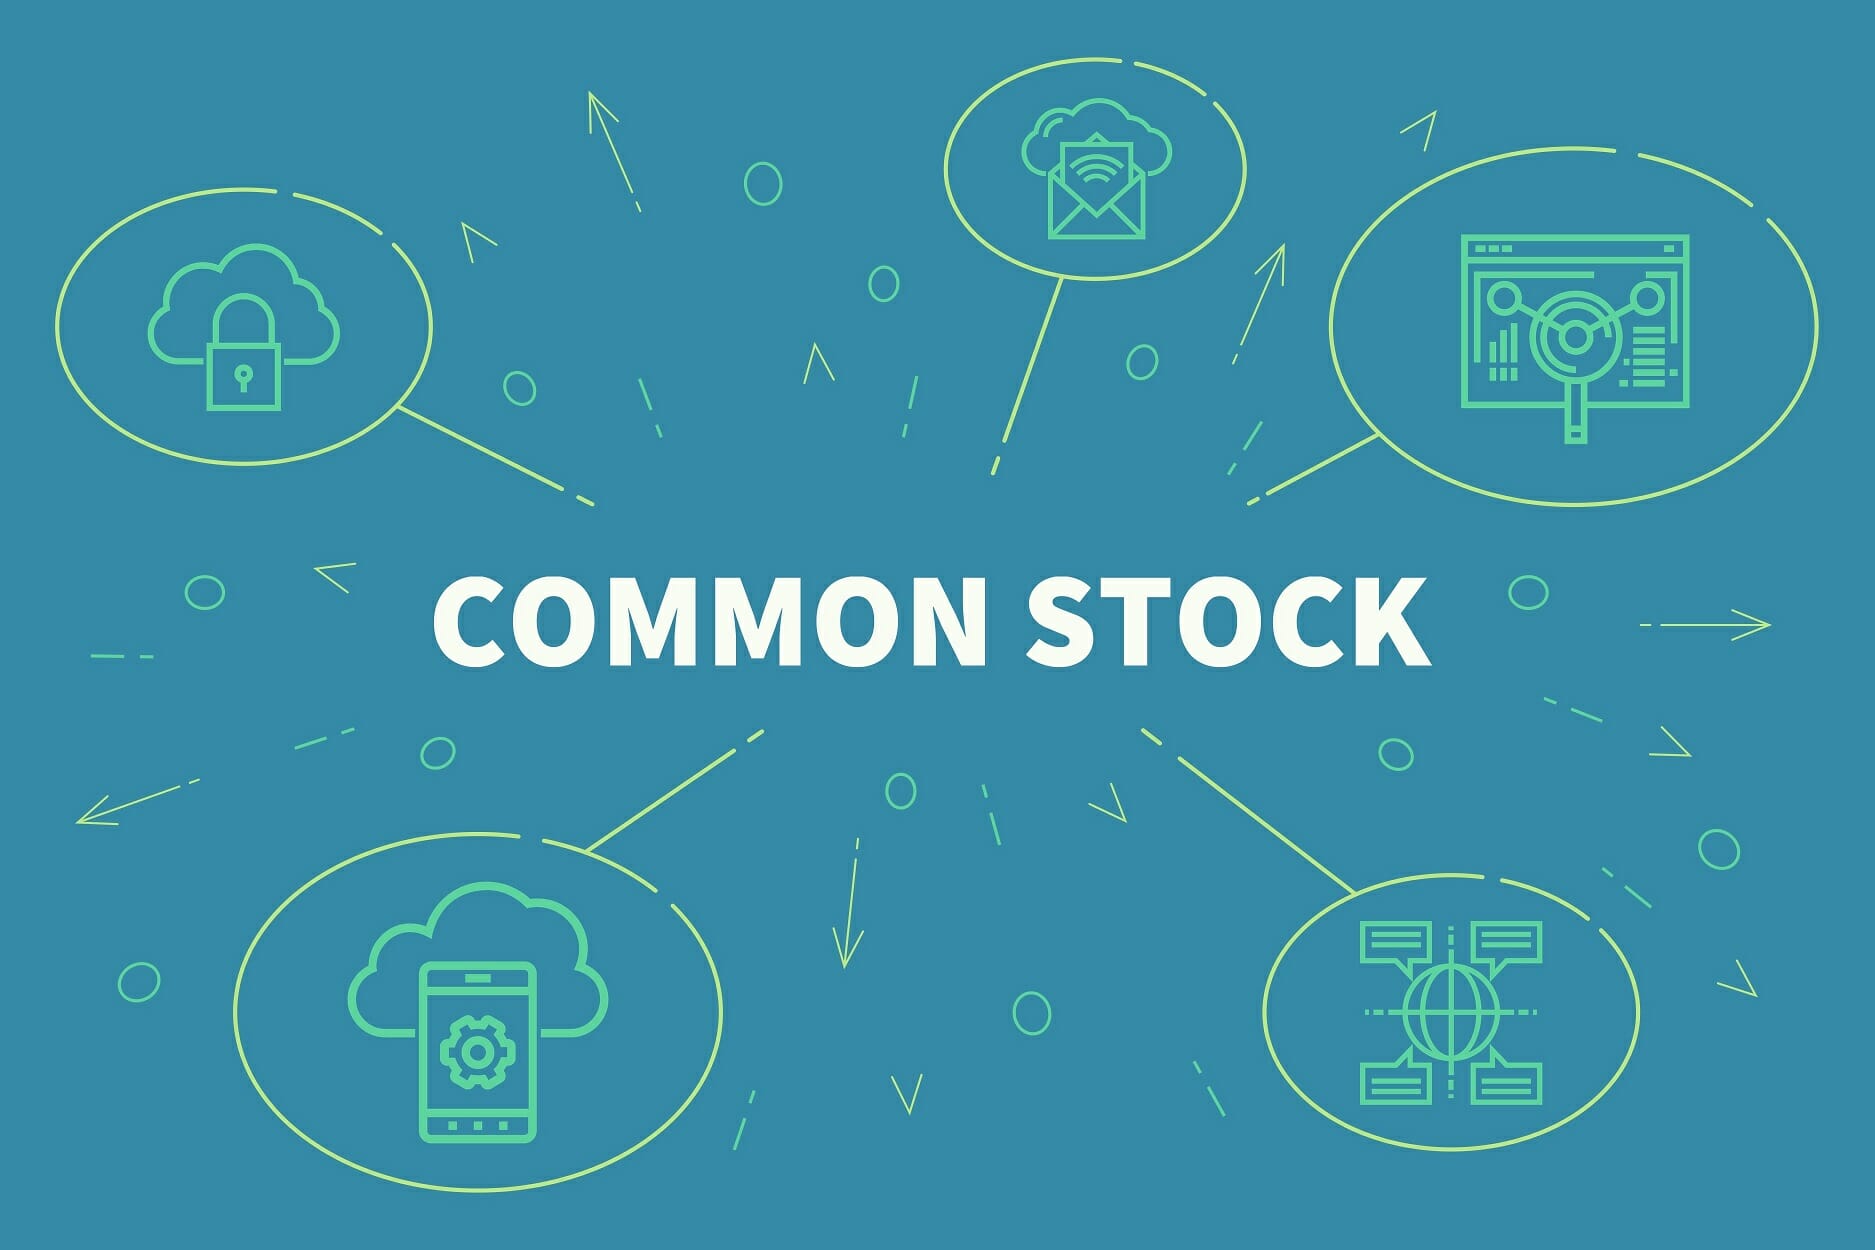 Common Stock - Definition, Examples, Classifications of Shares